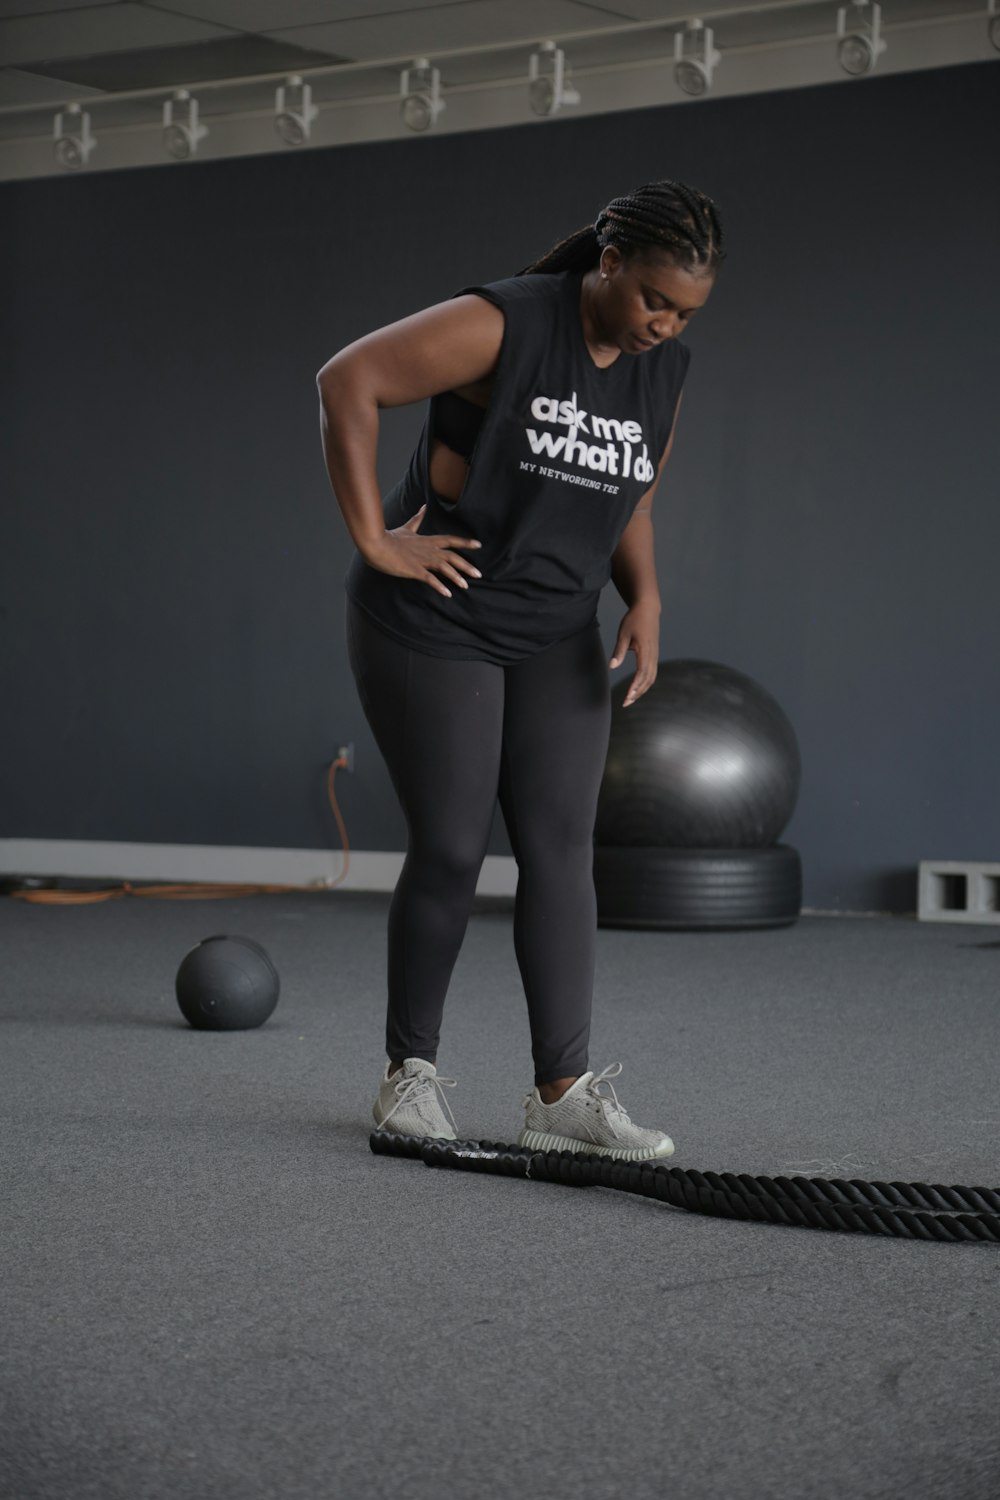 woman in black tank top and leggings holding black exercise ball